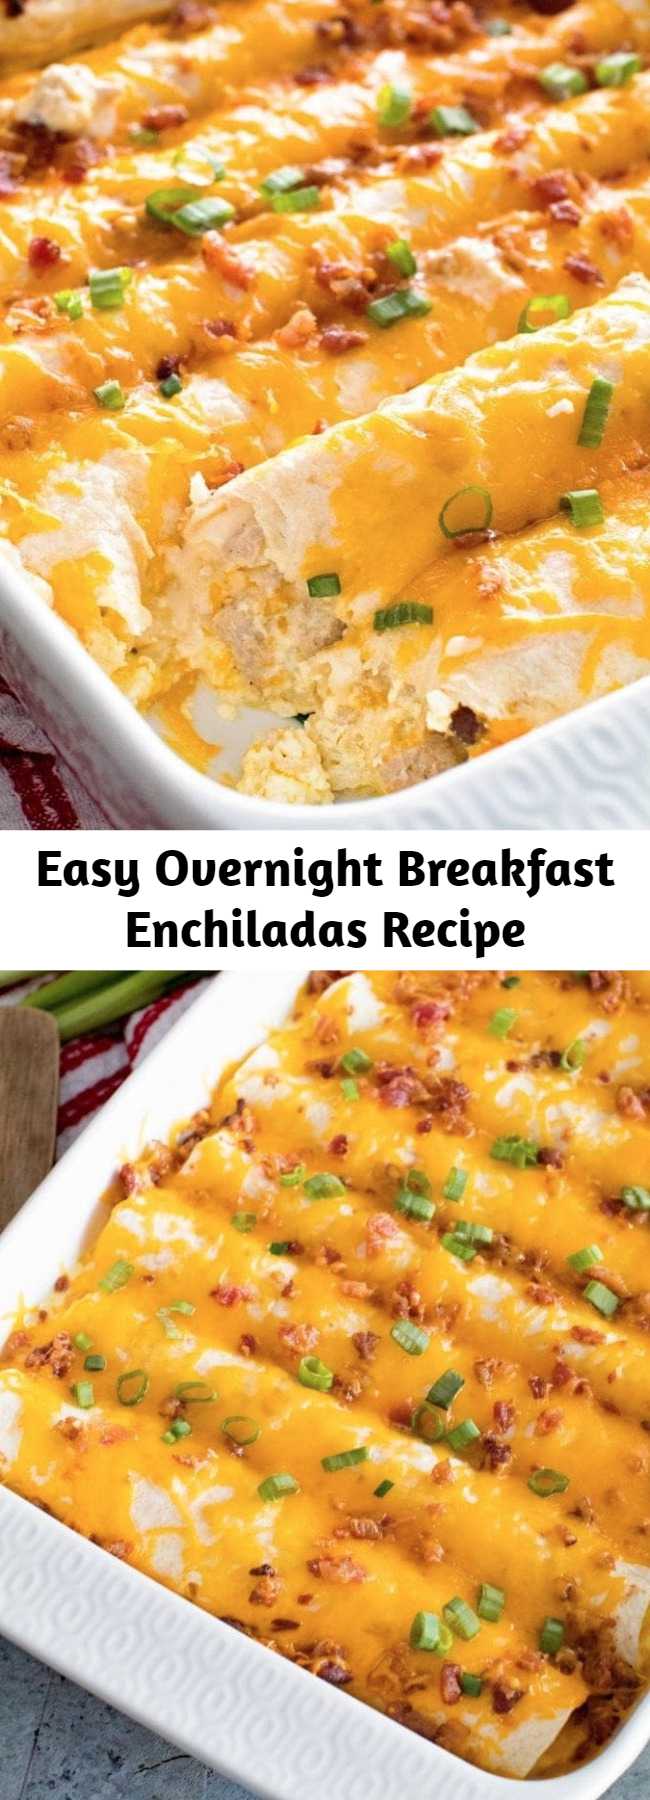 Easy Overnight Breakfast Enchiladas Recipe - Tortillas stuffed with Sausage, Eggs,Cheese and Bacon! This is the Perfect Overnight Breakfast Casserole Recipe!